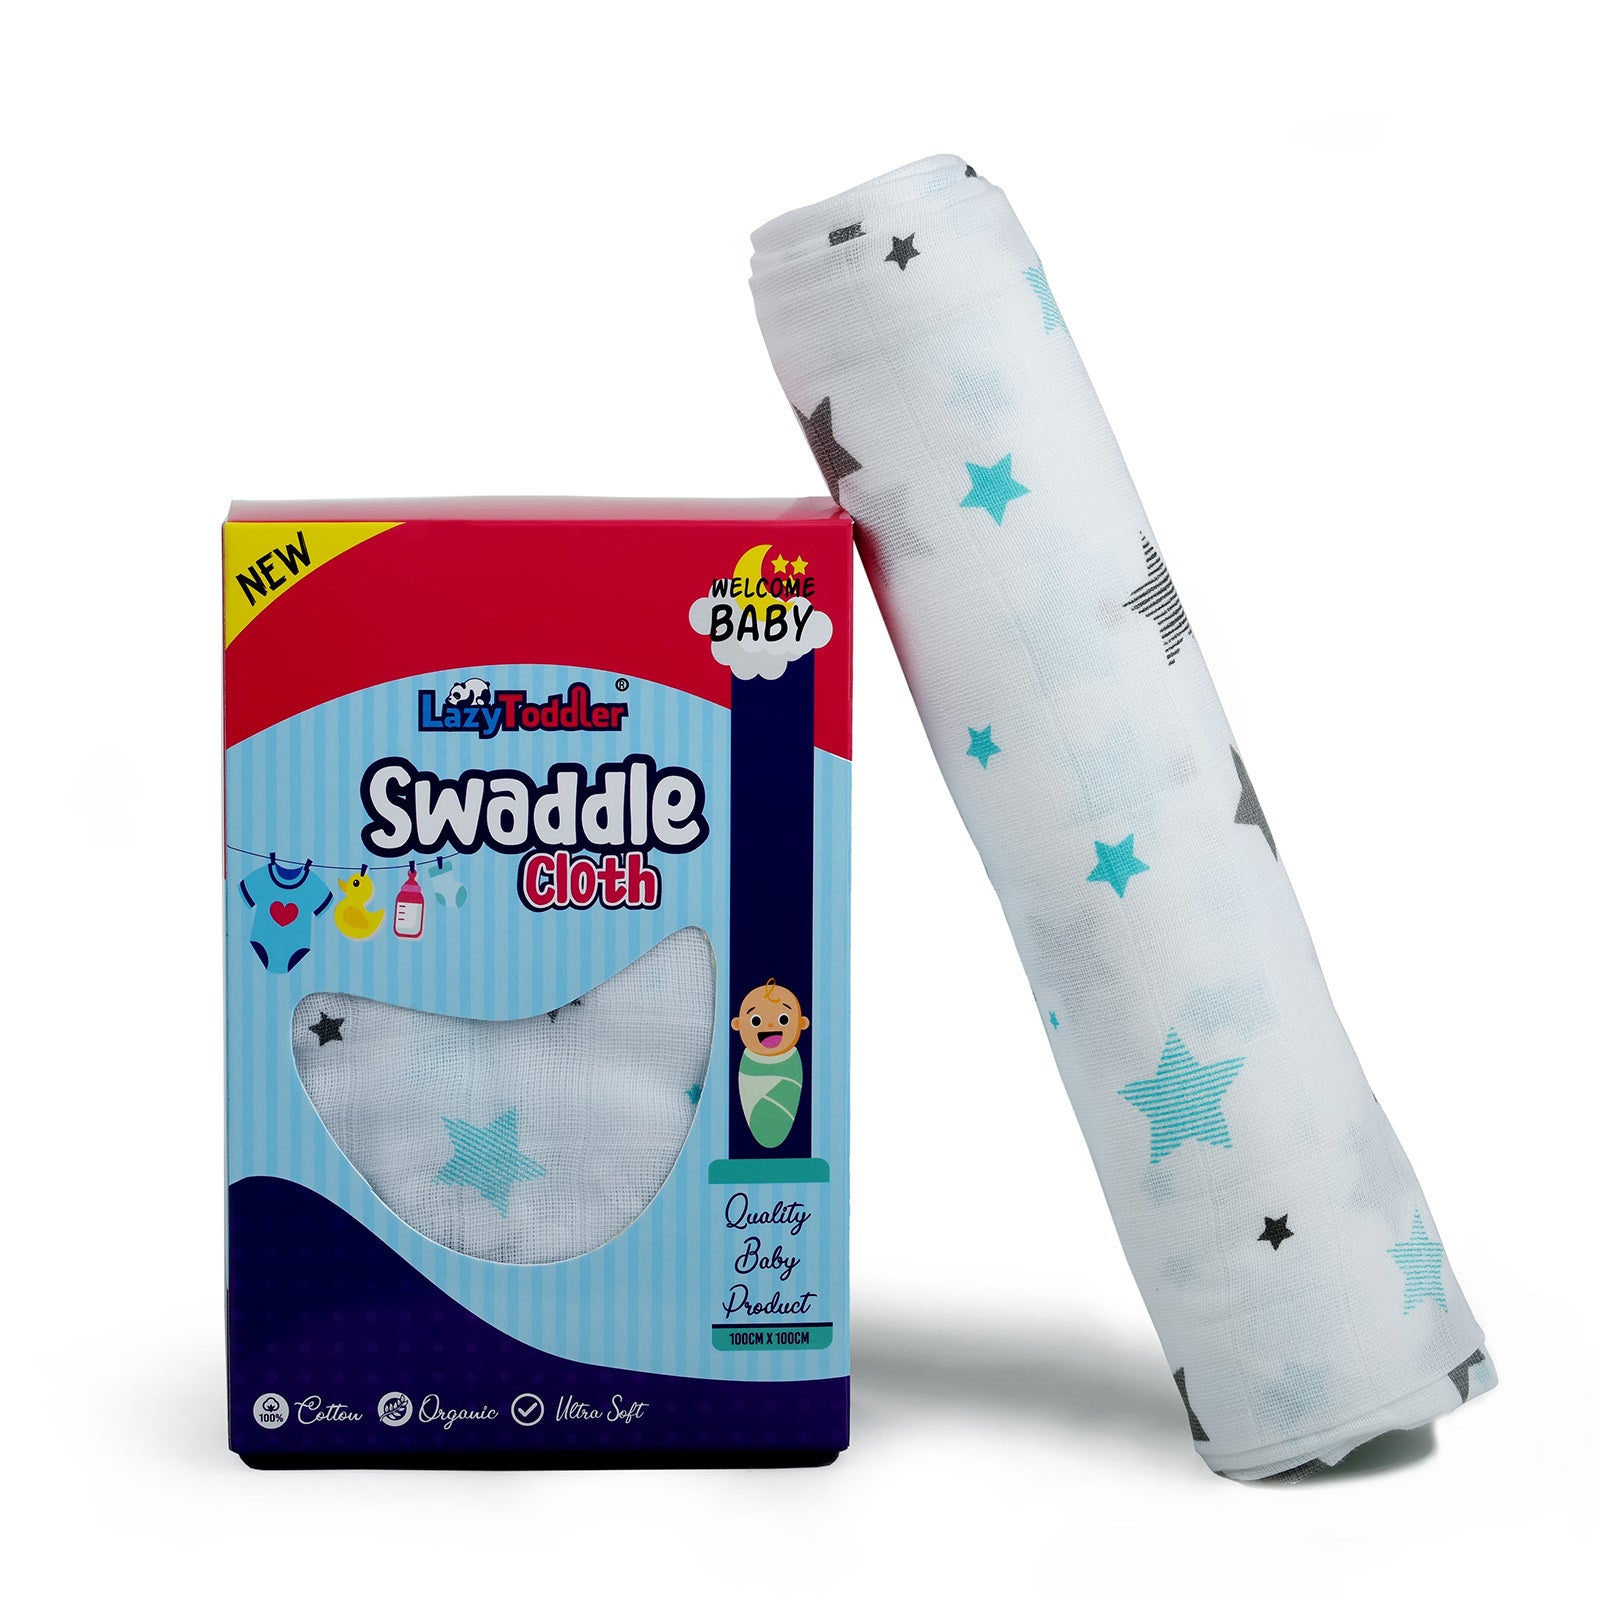 Adorable swaddle designs Swaddle comfort for infants Baby shower gift ideas Blankets for newborns